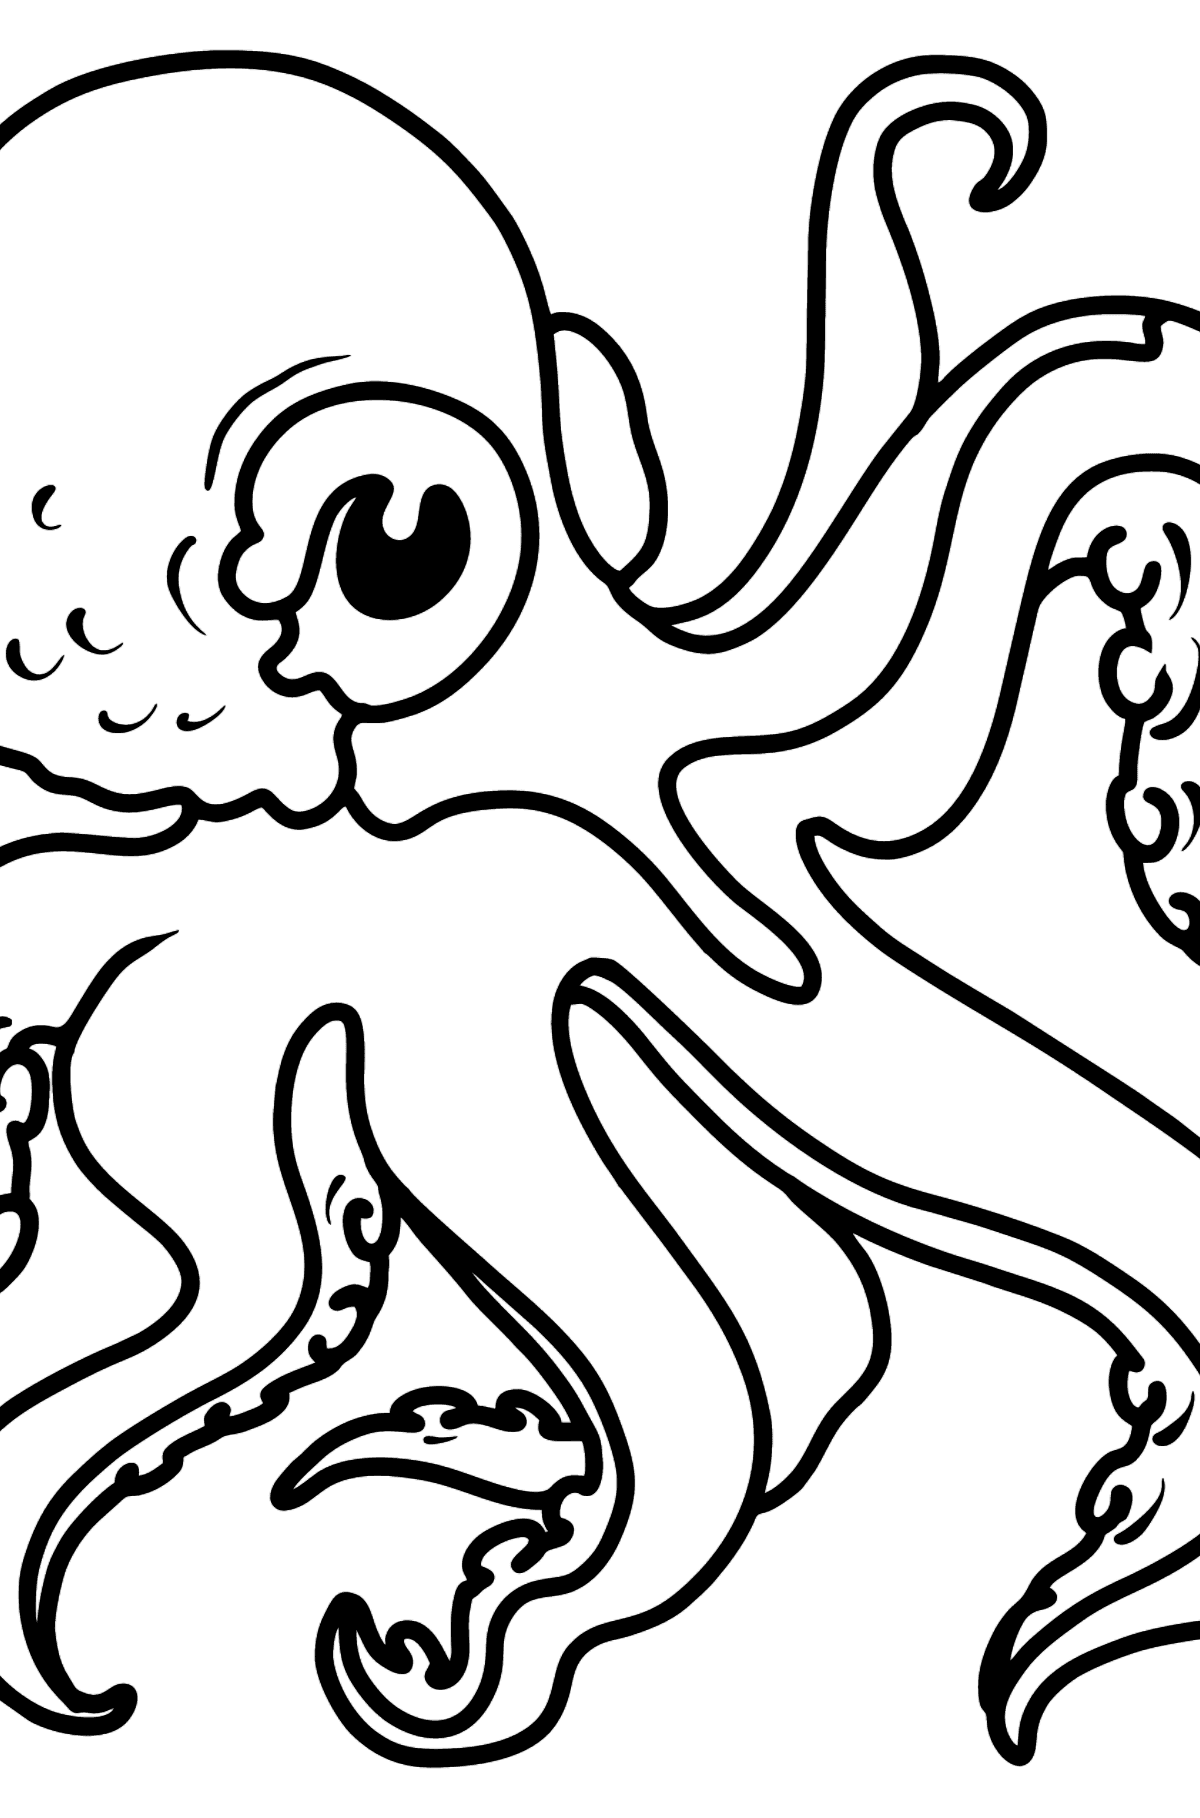 Octopus coloring page - Coloring Pages for Kids